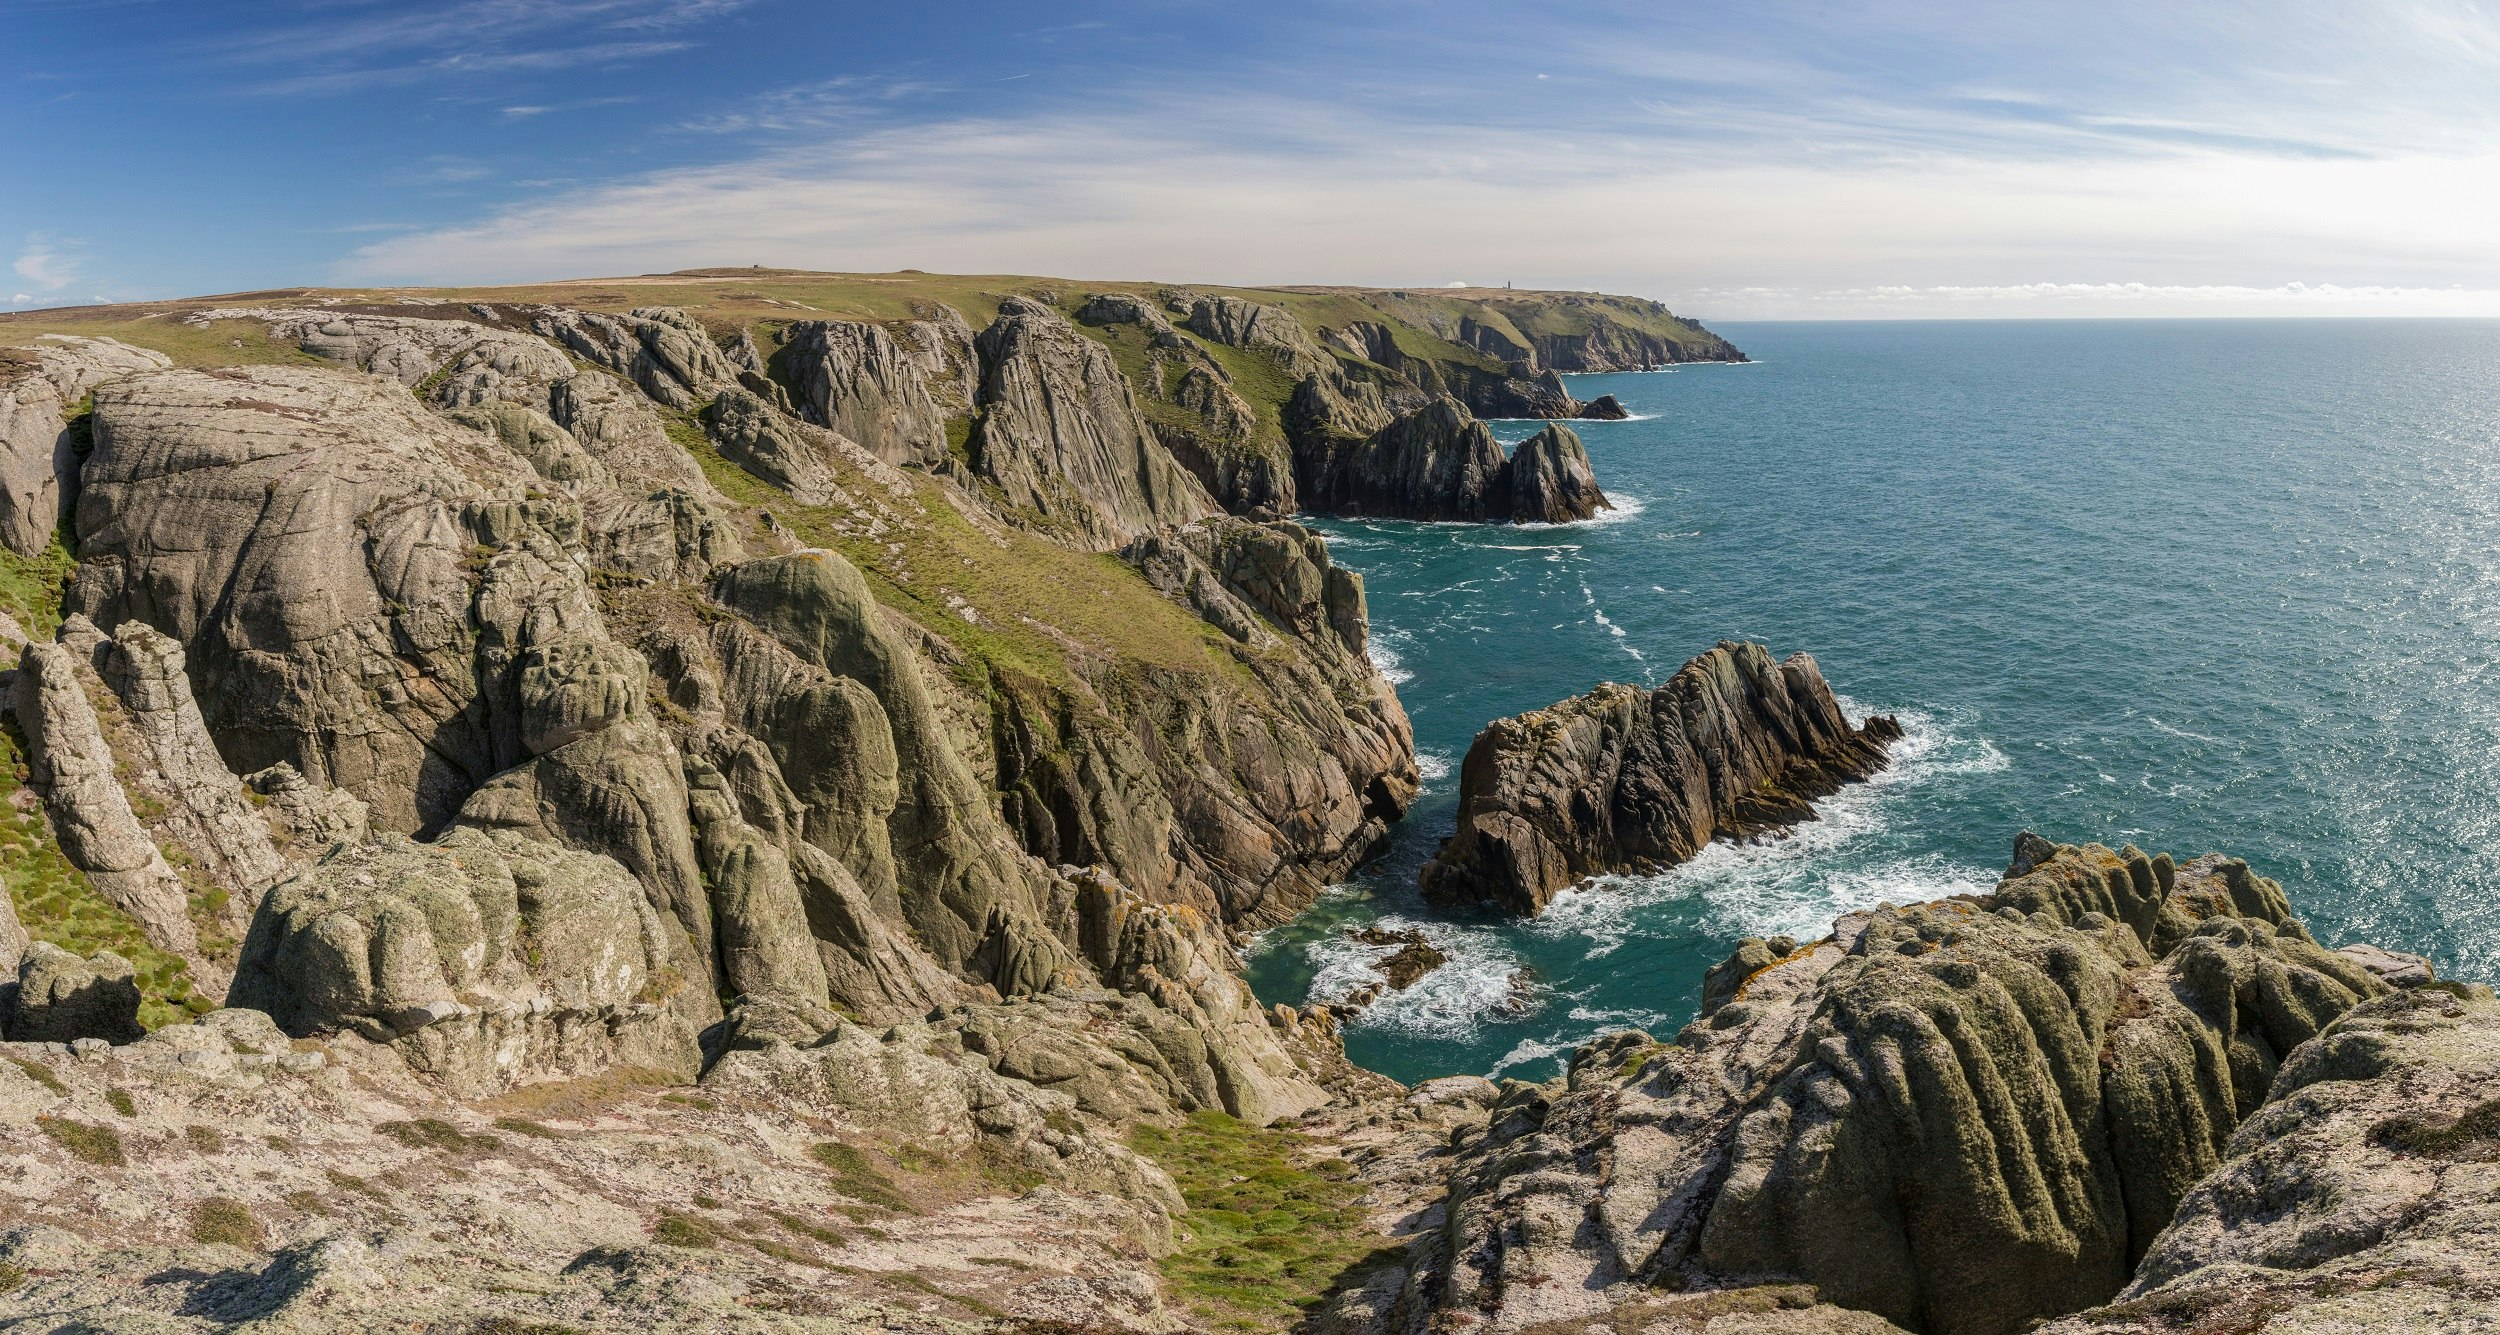 Rocky cliffs stretch out into the distance, some covered with grass and moss. The Atlantic Ocean is to the right